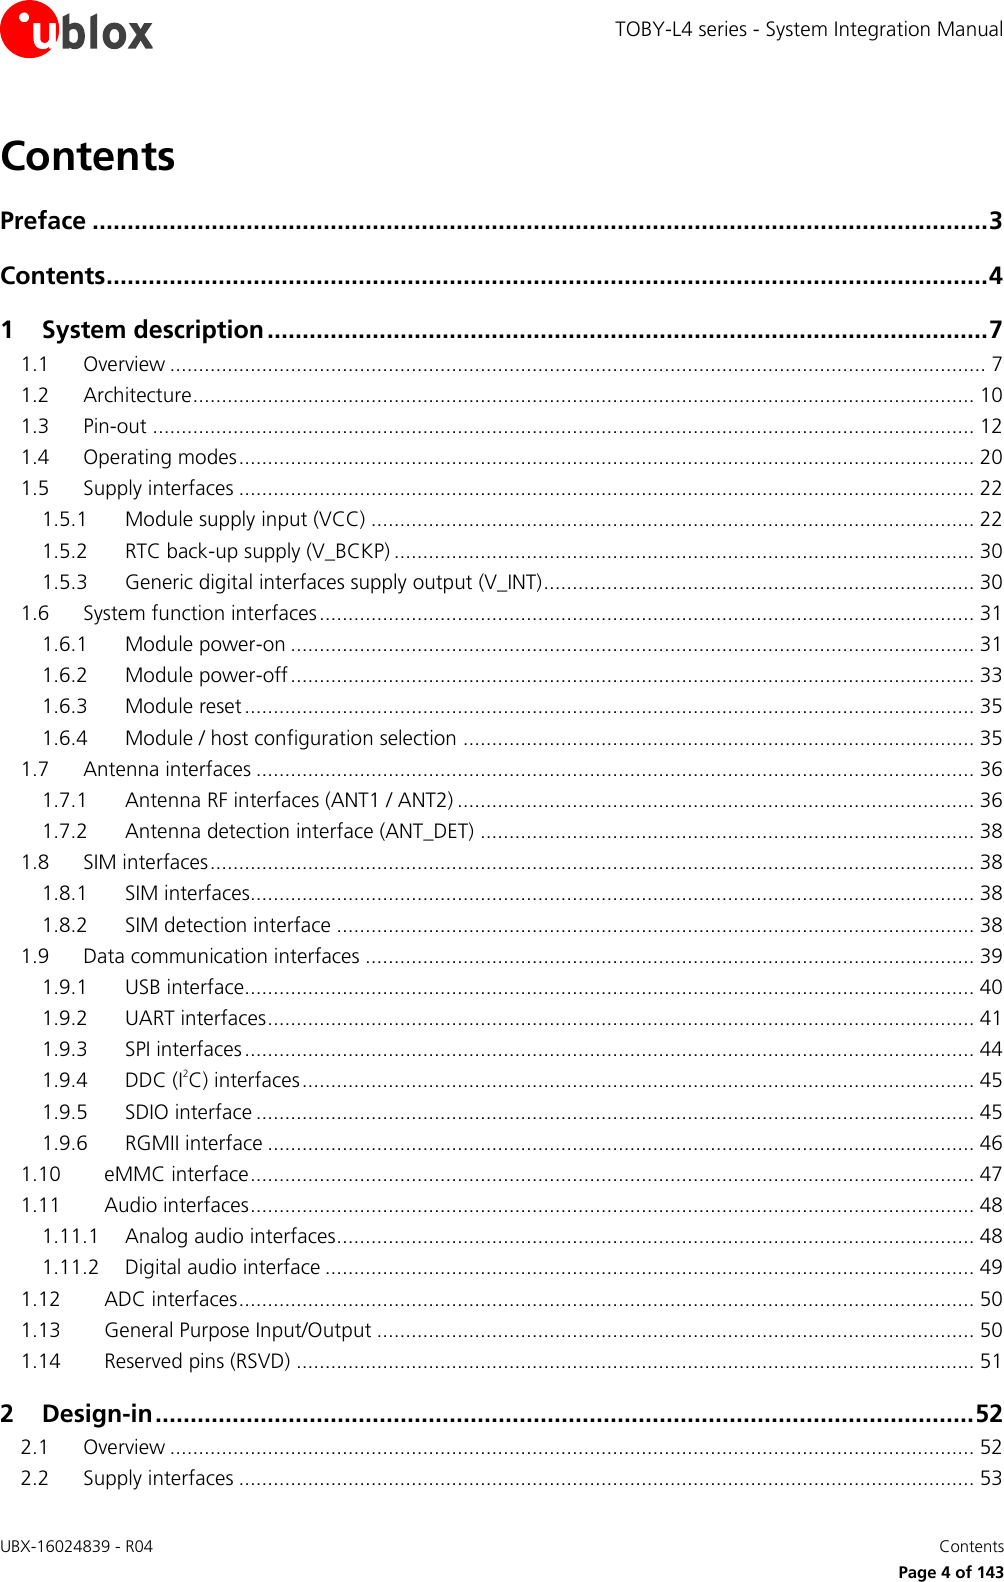 TOBY-L4 series - System Integration Manual UBX-16024839 - R04    Contents     Page 4 of 143 Contents Preface ................................................................................................................................ 3 Contents .............................................................................................................................. 4 1 System description ....................................................................................................... 7 1.1 Overview .............................................................................................................................................. 7 1.2 Architecture ........................................................................................................................................ 10 1.3 Pin-out ............................................................................................................................................... 12 1.4 Operating modes ................................................................................................................................ 20 1.5 Supply interfaces ................................................................................................................................ 22 1.5.1 Module supply input (VCC) ......................................................................................................... 22 1.5.2 RTC back-up supply (V_BCKP) ..................................................................................................... 30 1.5.3 Generic digital interfaces supply output (V_INT) ........................................................................... 30 1.6 System function interfaces .................................................................................................................. 31 1.6.1 Module power-on ....................................................................................................................... 31 1.6.2 Module power-off ....................................................................................................................... 33 1.6.3 Module reset ............................................................................................................................... 35 1.6.4 Module / host configuration selection ......................................................................................... 35 1.7 Antenna interfaces ............................................................................................................................. 36 1.7.1 Antenna RF interfaces (ANT1 / ANT2) .......................................................................................... 36 1.7.2 Antenna detection interface (ANT_DET) ...................................................................................... 38 1.8 SIM interfaces ..................................................................................................................................... 38 1.8.1 SIM interfaces.............................................................................................................................. 38 1.8.2 SIM detection interface ............................................................................................................... 38 1.9 Data communication interfaces .......................................................................................................... 39 1.9.1 USB interface............................................................................................................................... 40 1.9.2 UART interfaces ........................................................................................................................... 41 1.9.3 SPI interfaces ............................................................................................................................... 44 1.9.4 DDC (I2C) interfaces ..................................................................................................................... 45 1.9.5 SDIO interface ............................................................................................................................. 45 1.9.6 RGMII interface ........................................................................................................................... 46 1.10 eMMC interface .............................................................................................................................. 47 1.11 Audio interfaces .............................................................................................................................. 48 1.11.1 Analog audio interfaces ............................................................................................................... 48 1.11.2 Digital audio interface ................................................................................................................. 49 1.12 ADC interfaces ................................................................................................................................ 50 1.13 General Purpose Input/Output ........................................................................................................ 50 1.14 Reserved pins (RSVD) ...................................................................................................................... 51 2 Design-in ..................................................................................................................... 52 2.1 Overview ............................................................................................................................................ 52 2.2 Supply interfaces ................................................................................................................................ 53 